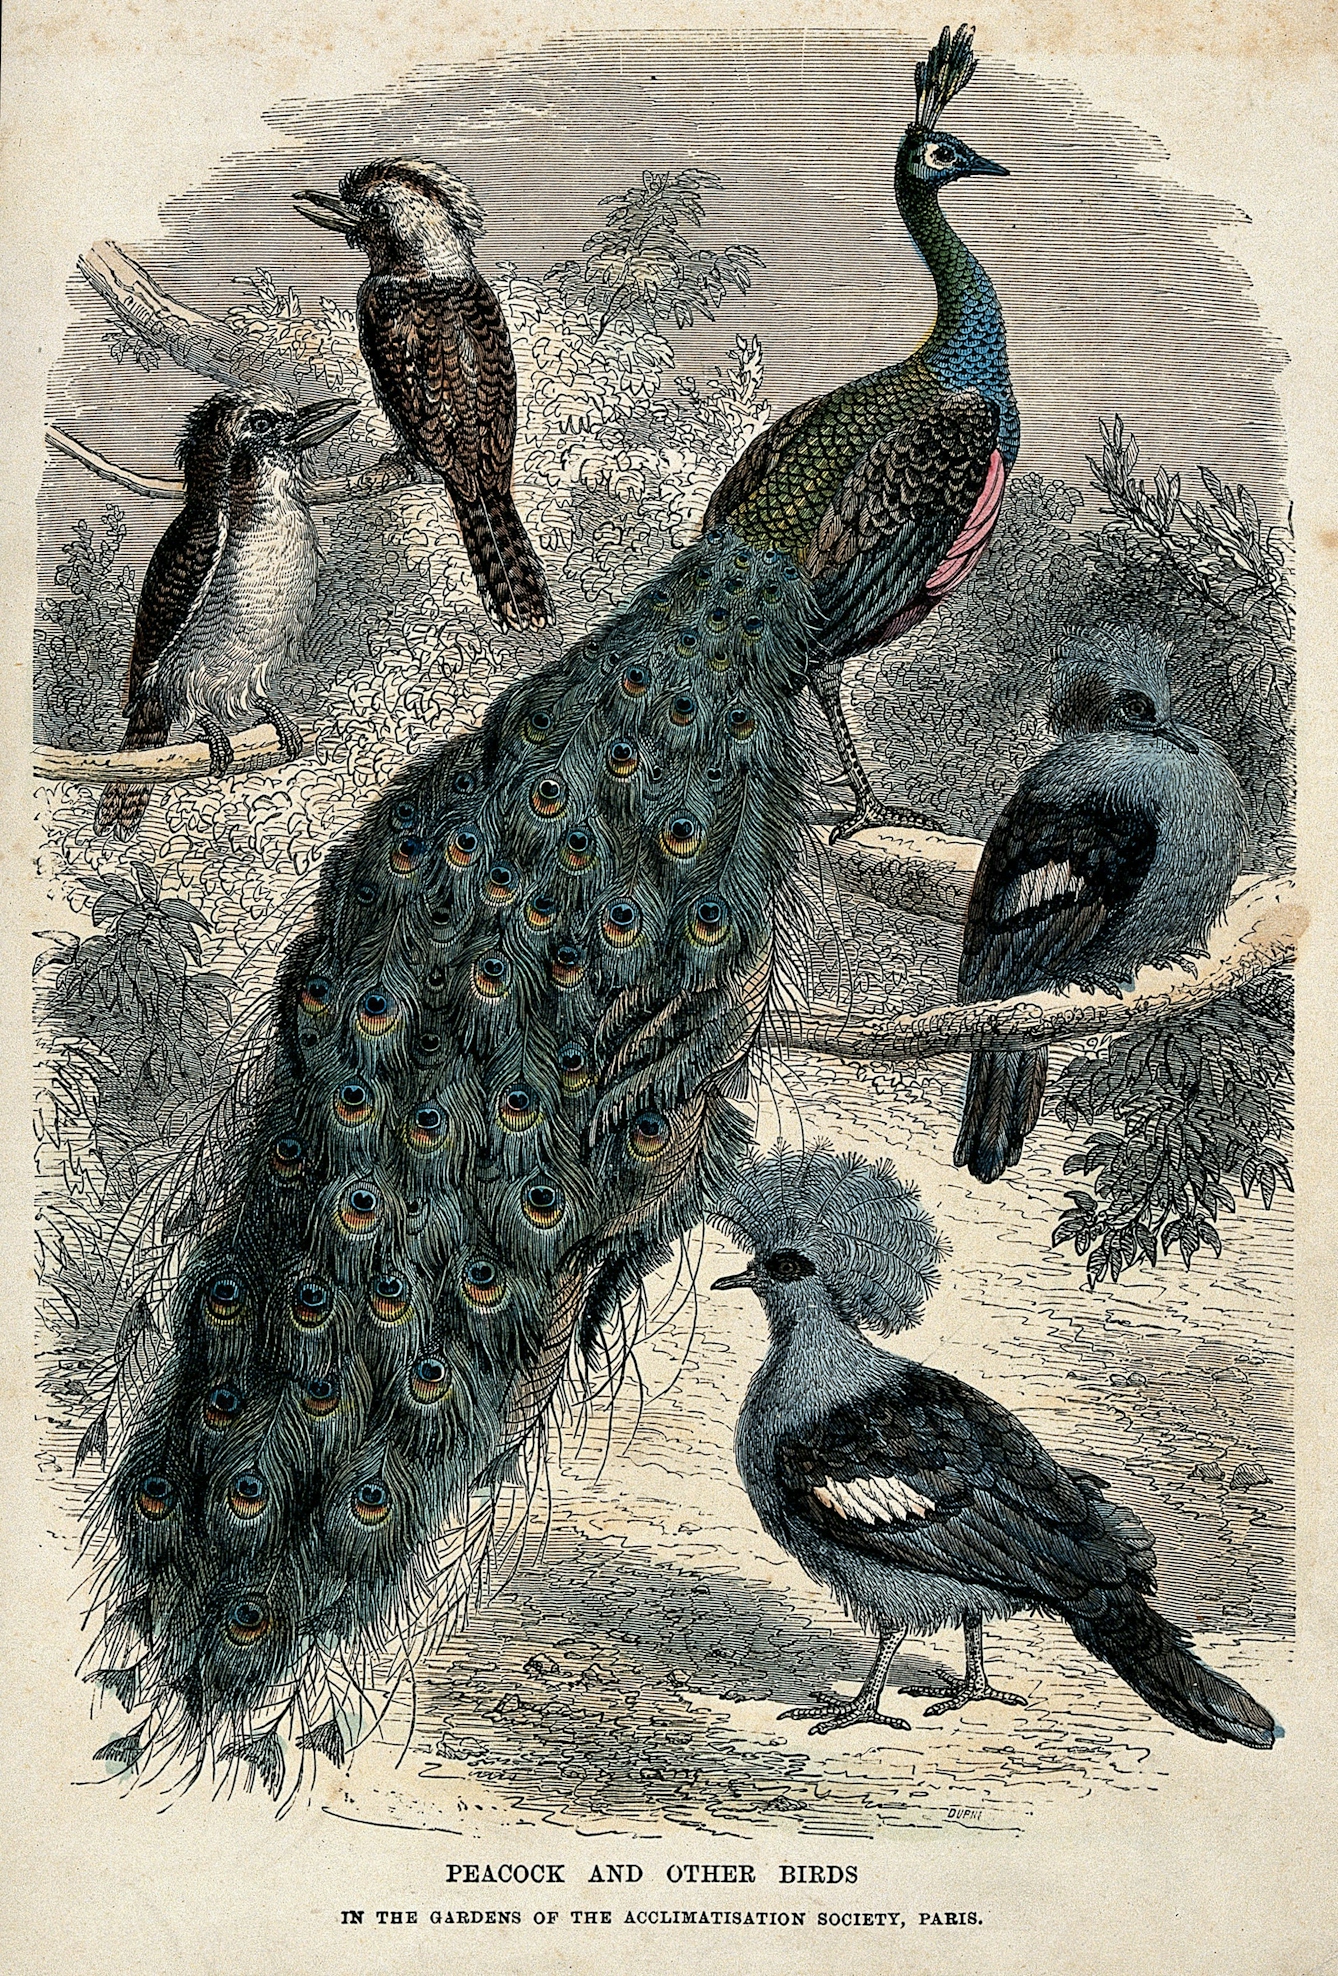 Gardens of the Acclimatisation Society in Paris: peacocks and other birds. Coloured wood engraving